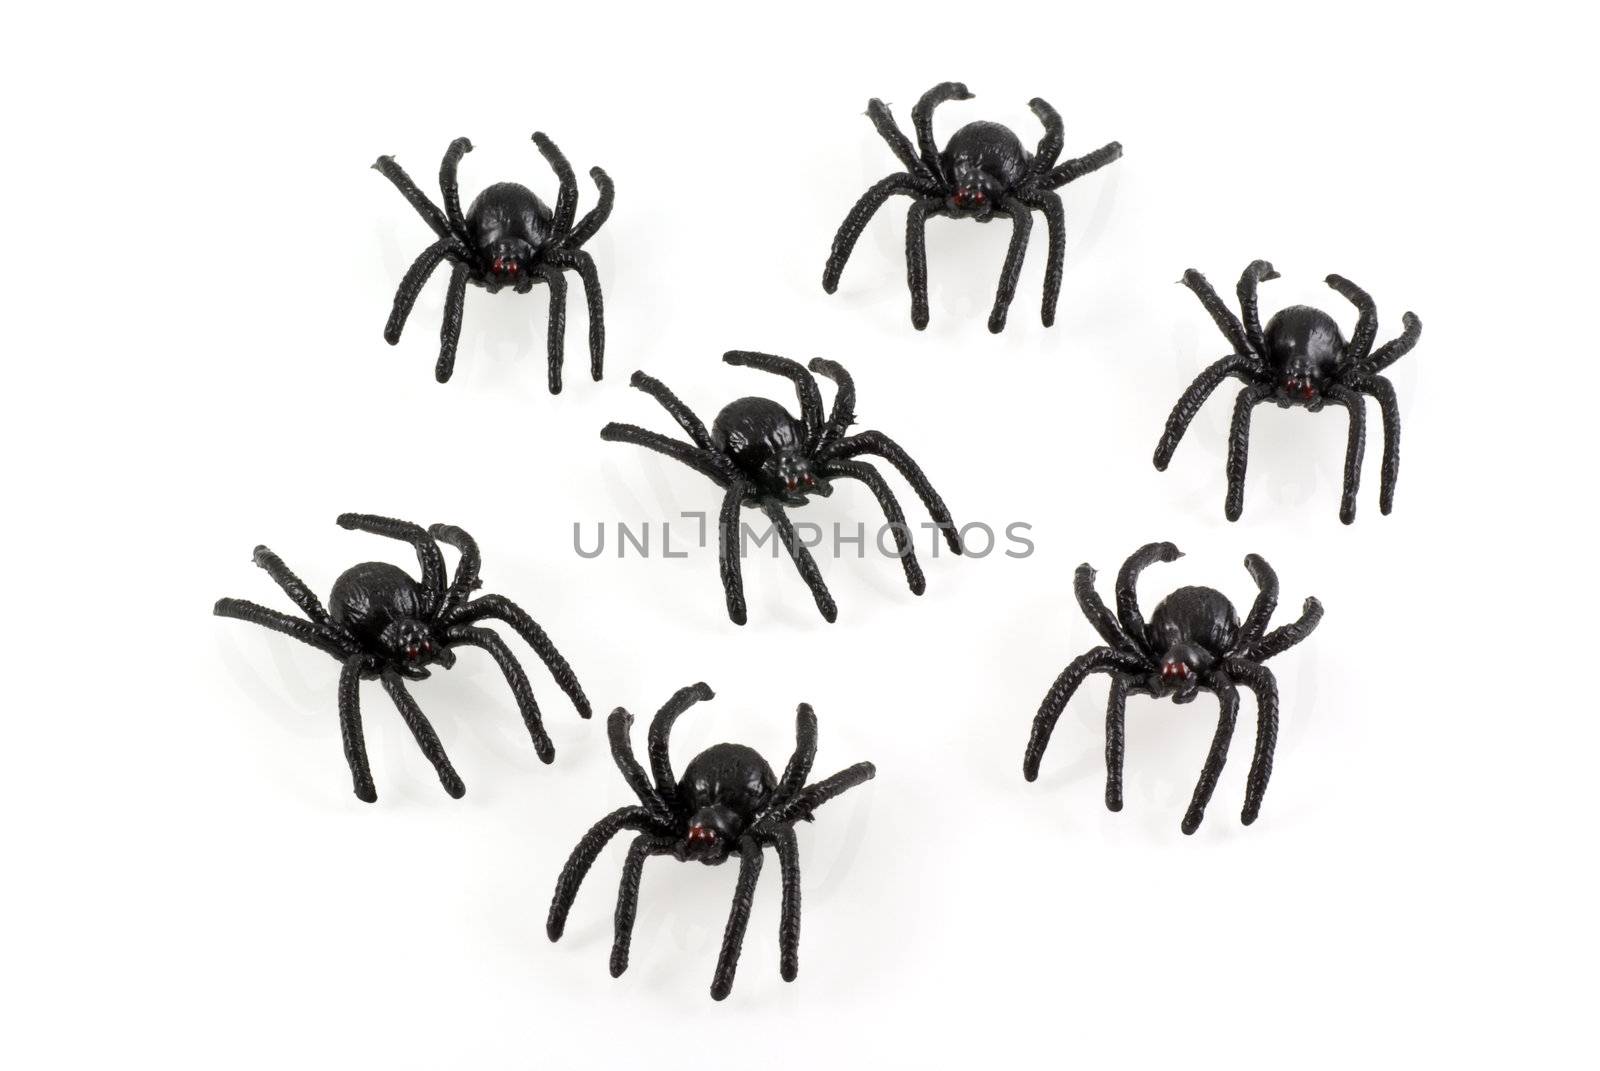 Toy spiders. by SasPartout